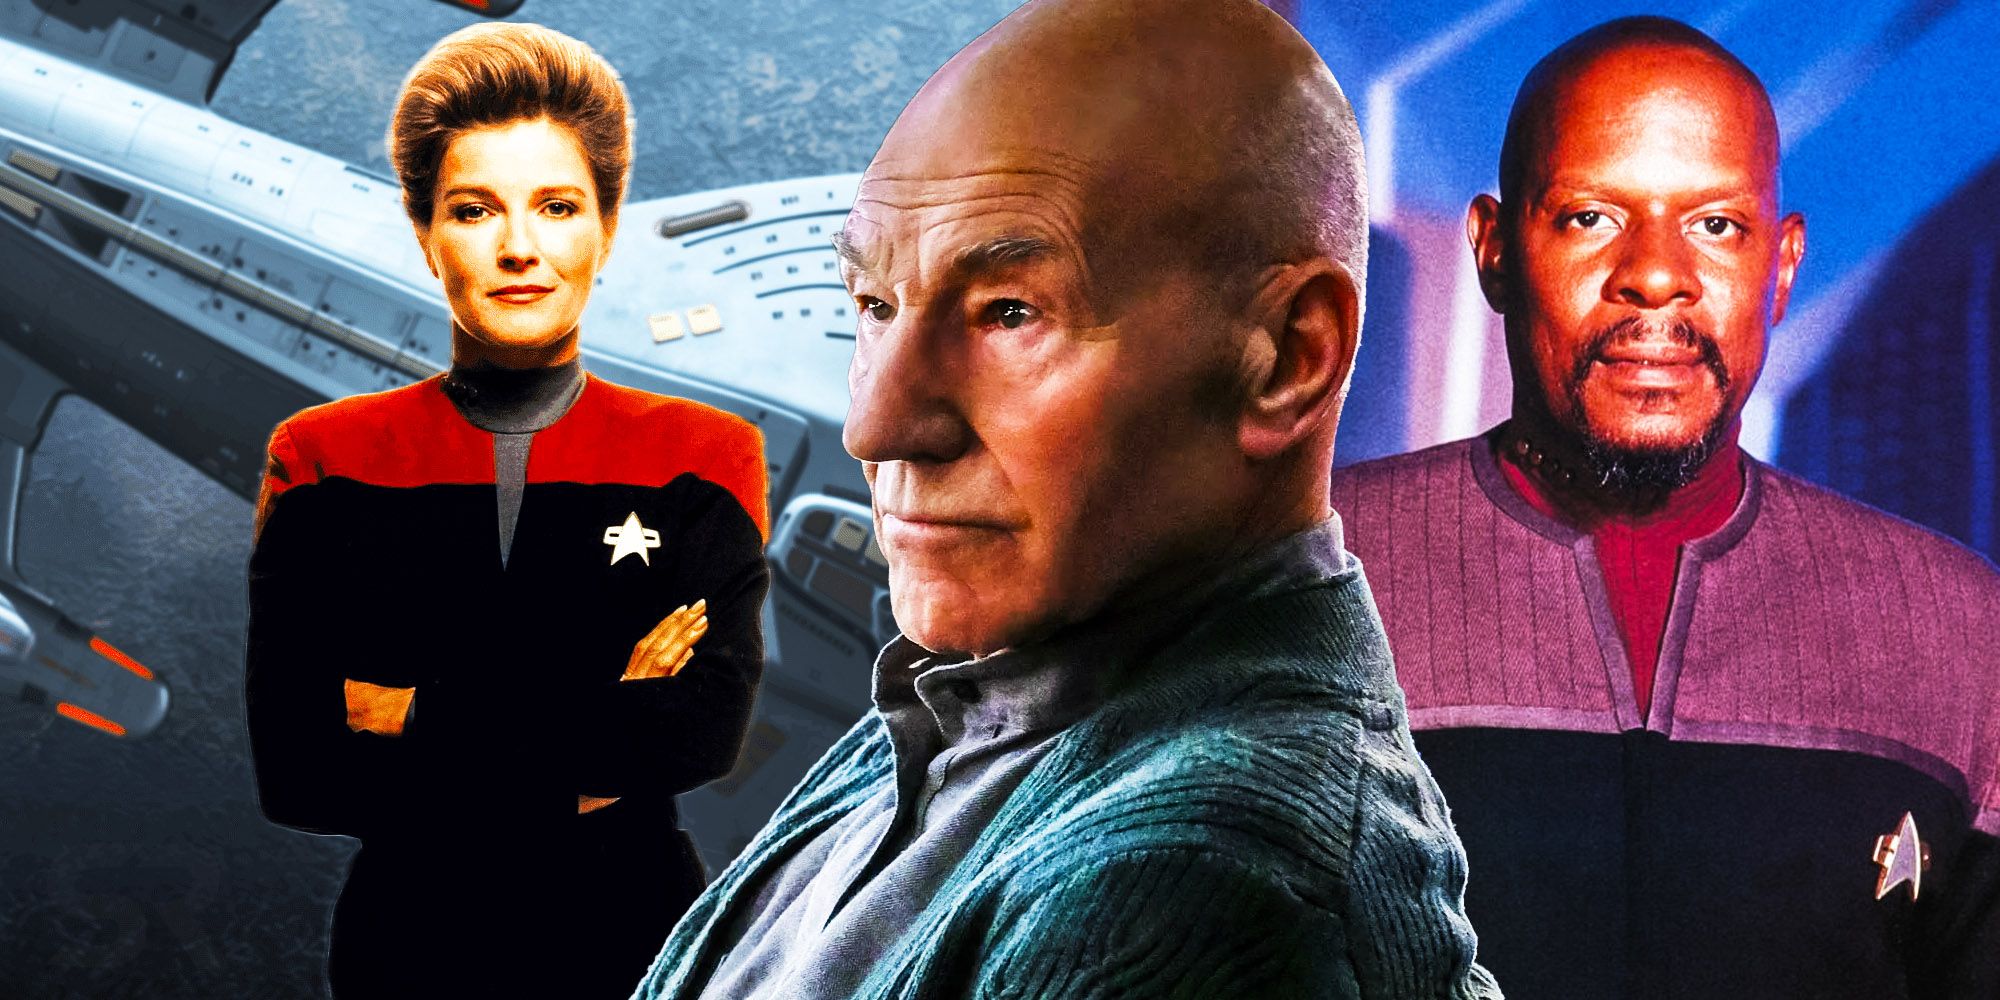 Only 3 Star Trek Shows Exist In For All Mankind’s Alternate History – But What Are They?